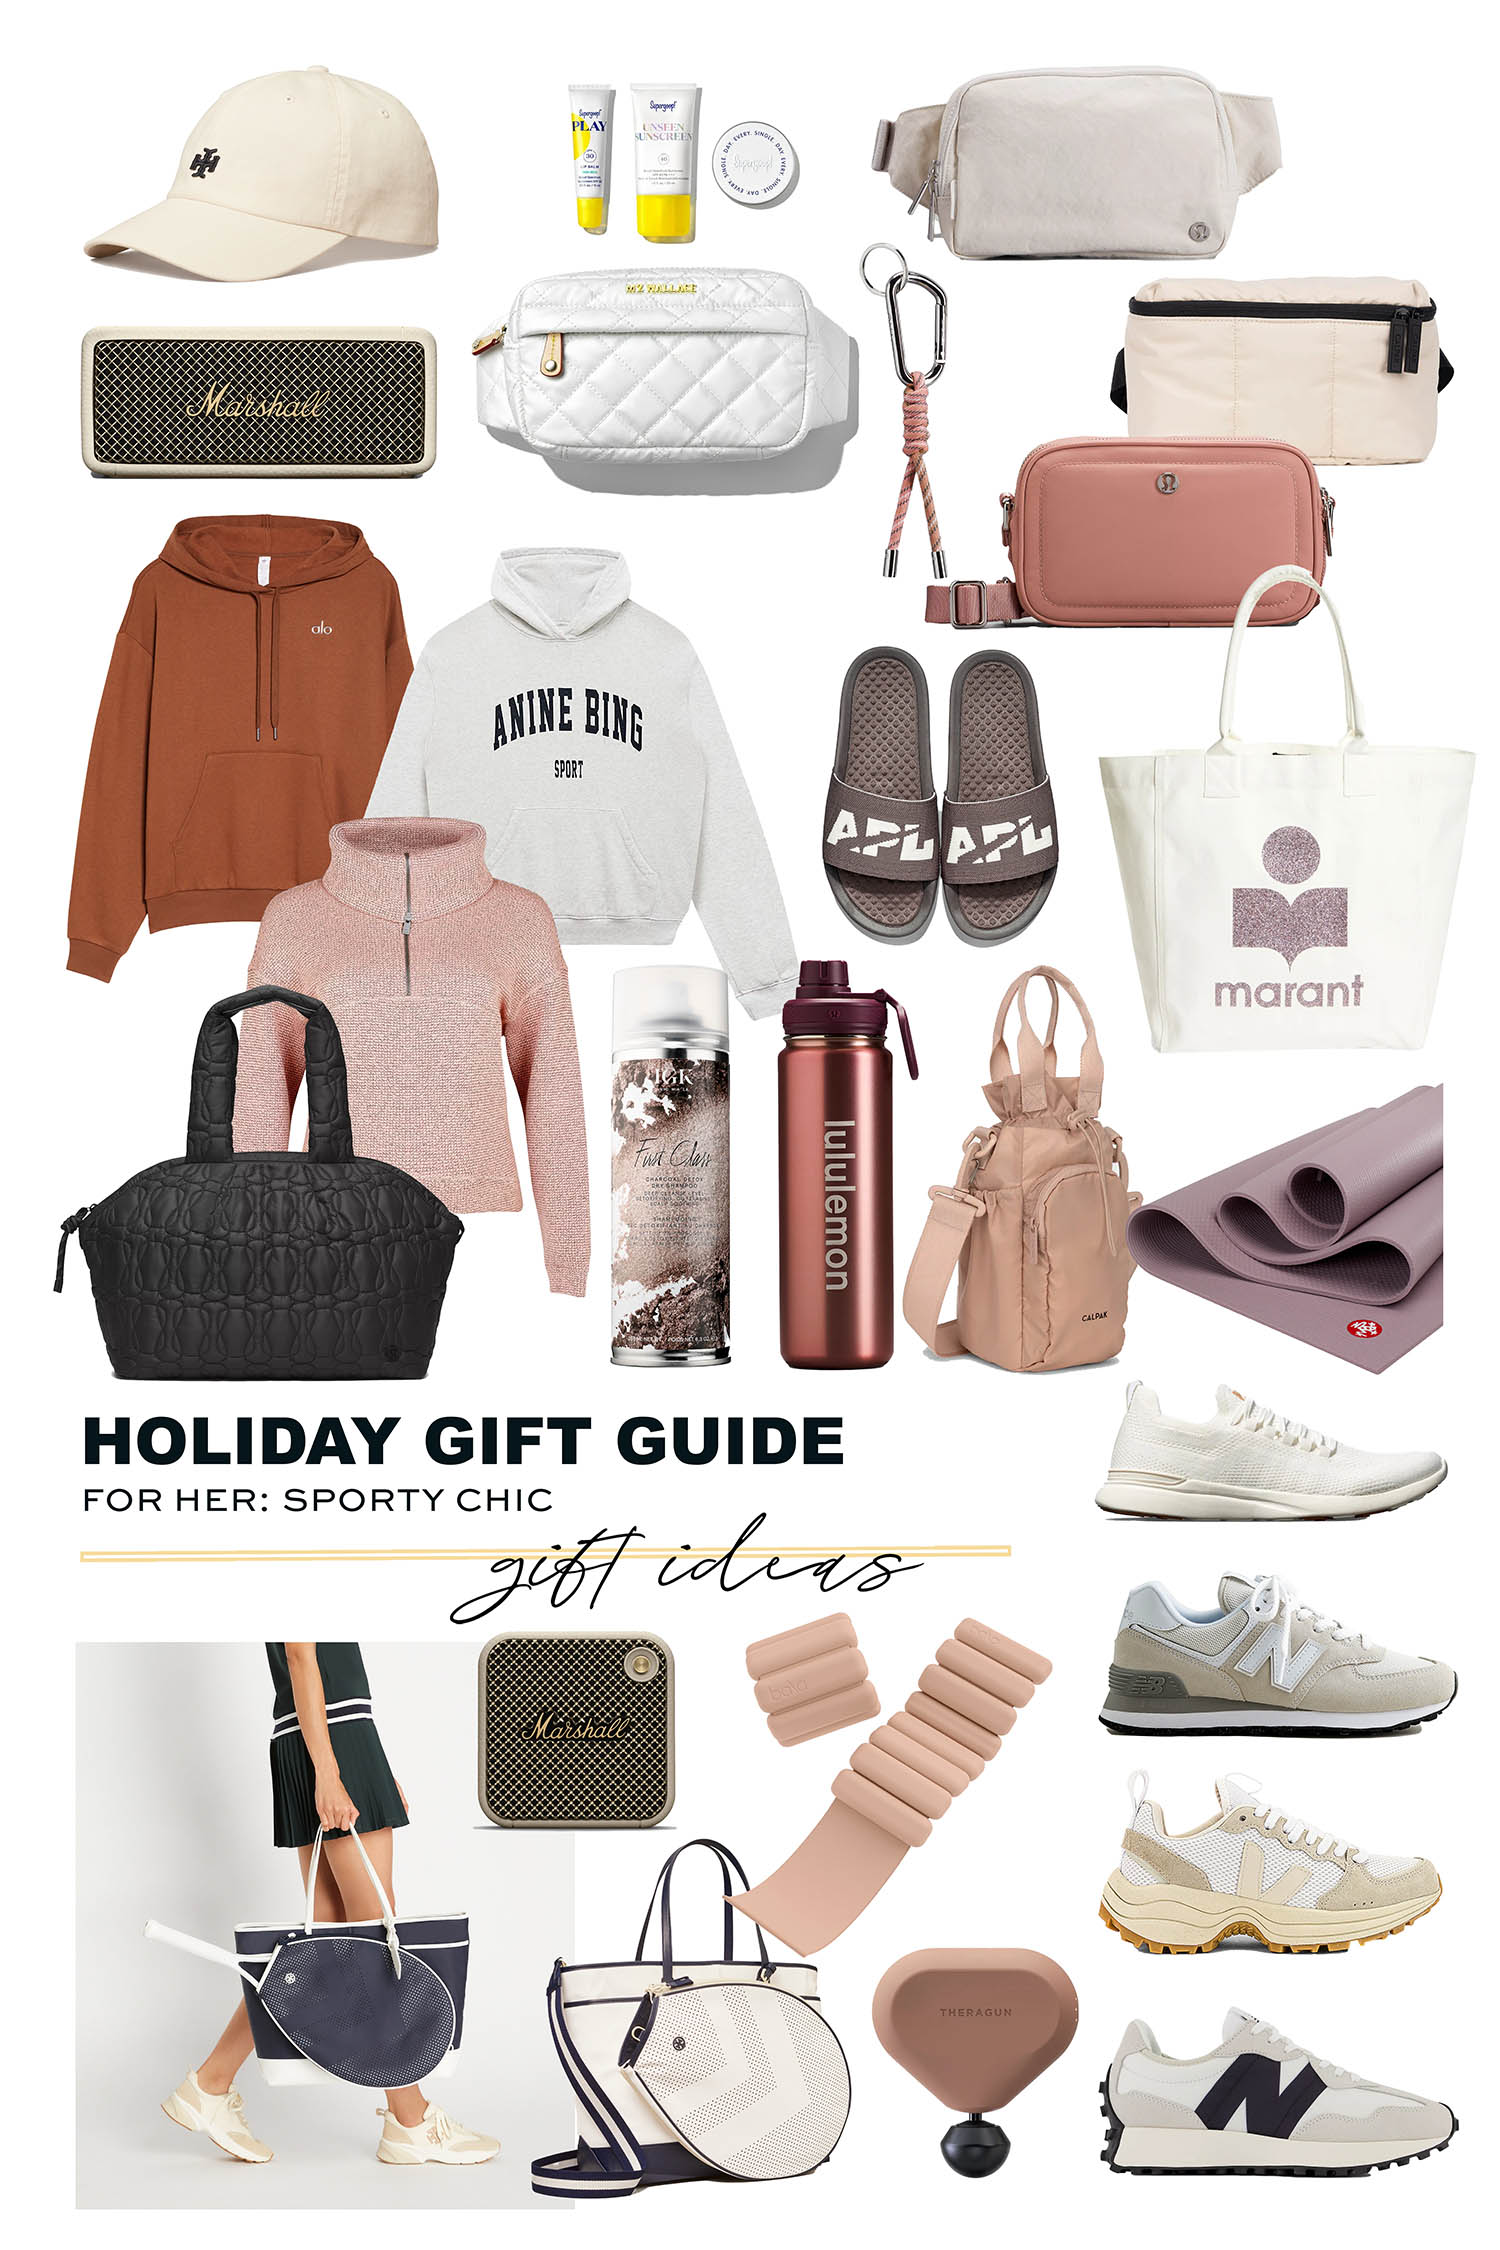 Holiday Gift Ideas for Everyone on Your List!